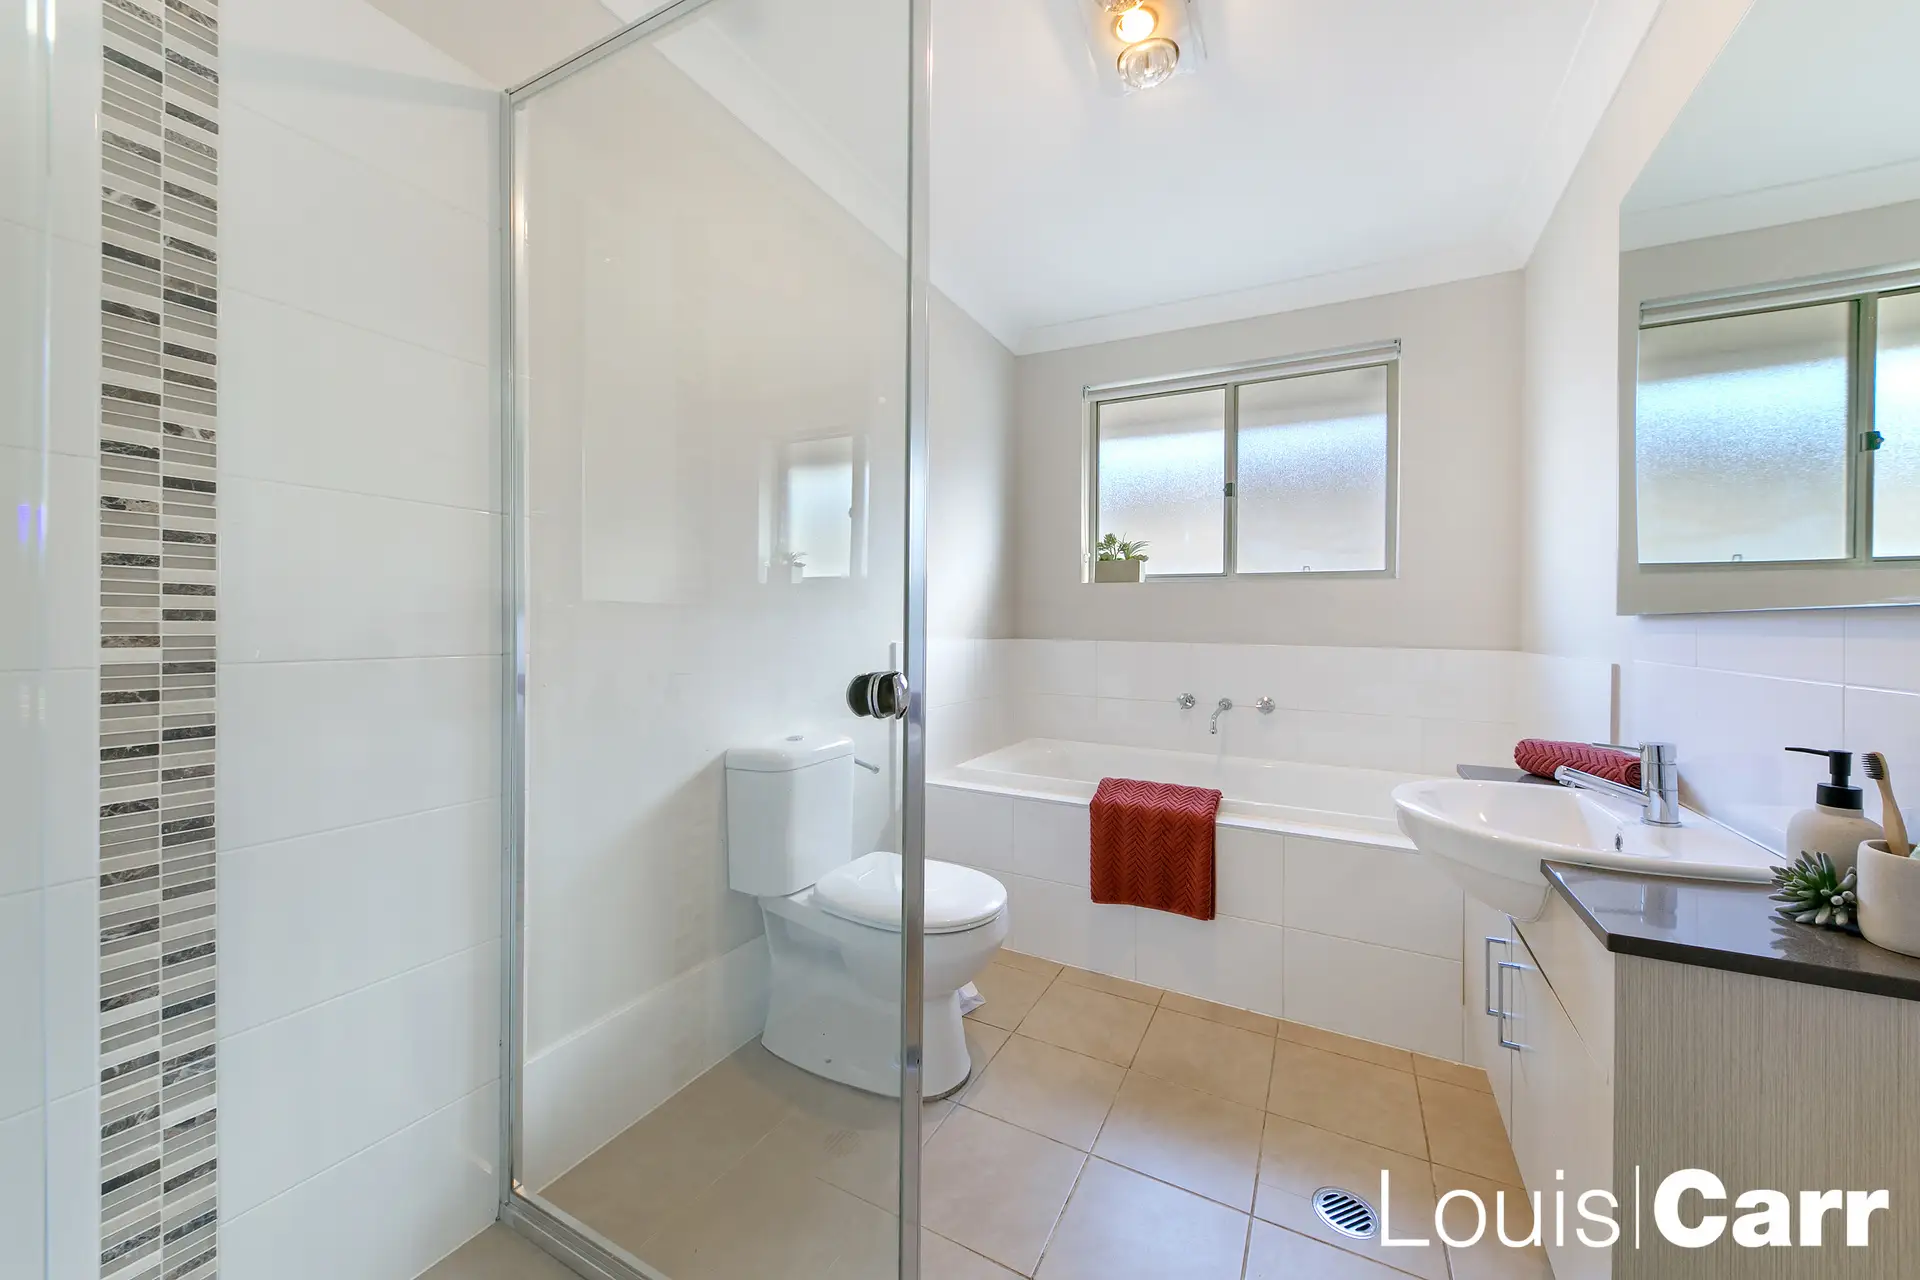 Photo #11: 4 Carisbrook Street, North Kellyville - Sold by Louis Carr Real Estate